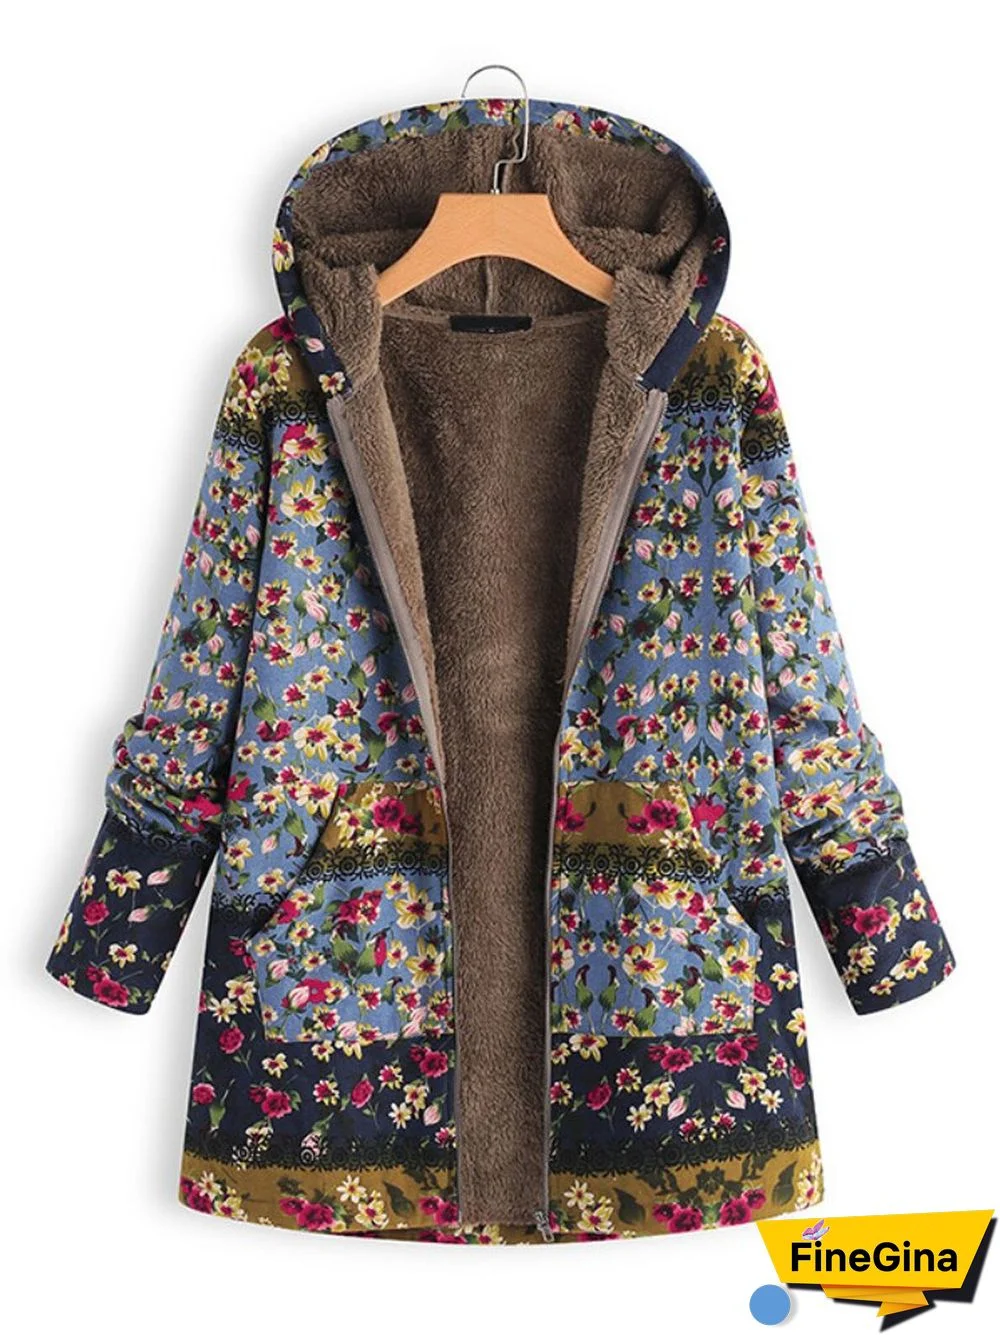 Winter Clothes Women New Printed Cotton Clothing Medium And Long Thickened Cotton Coat Coat Casual Jacket Women Coats Tops